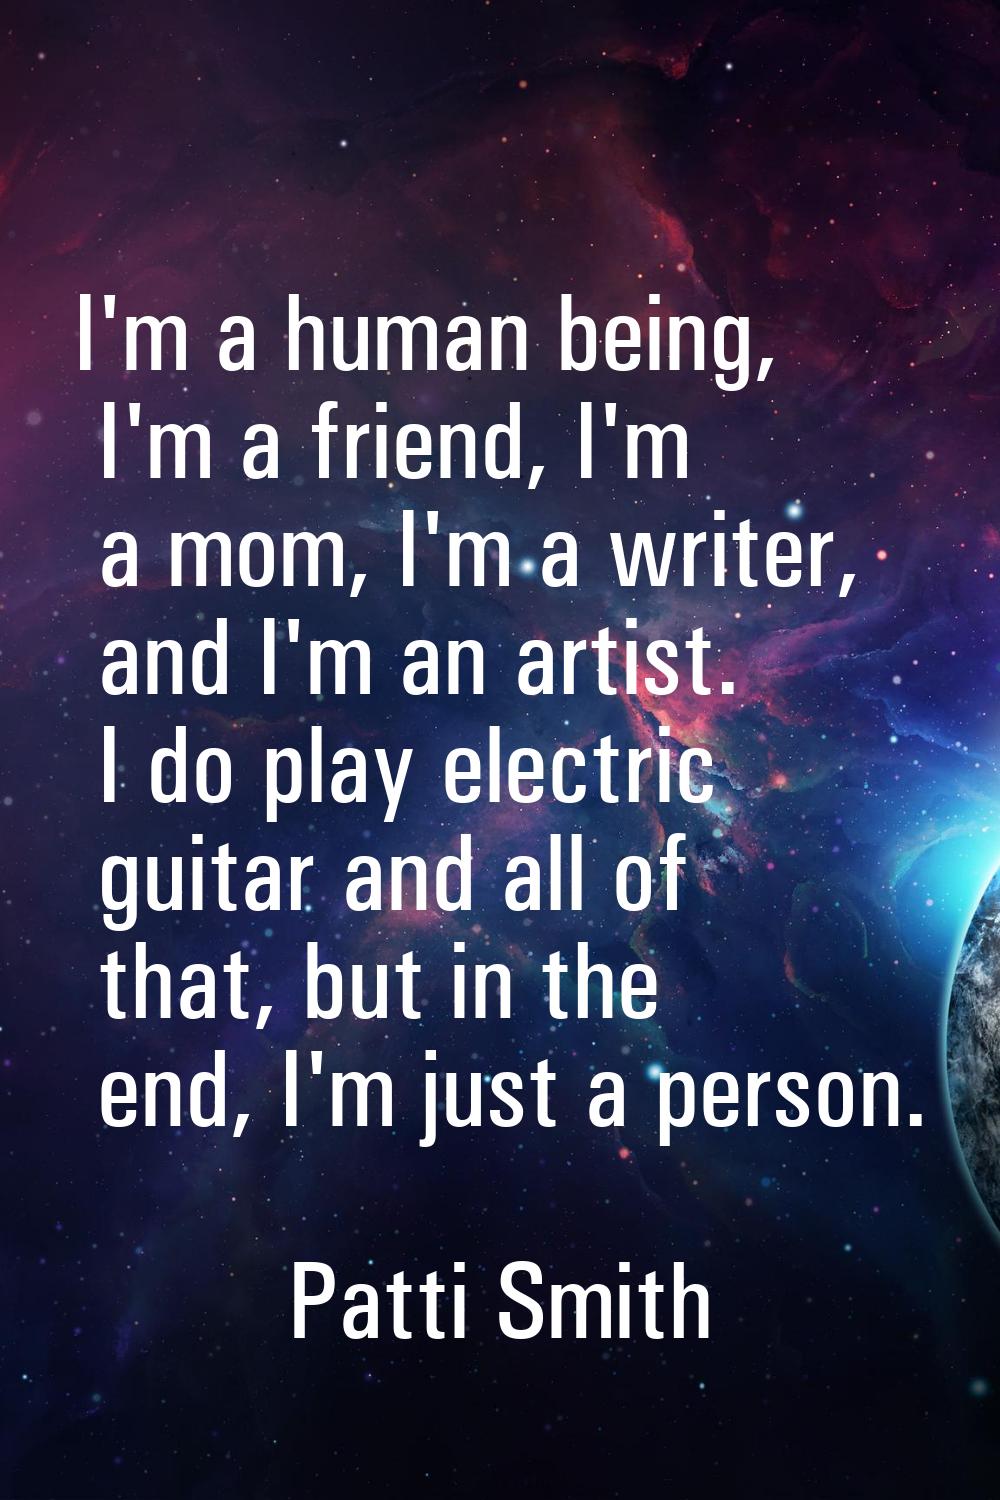 I'm a human being, I'm a friend, I'm a mom, I'm a writer, and I'm an artist. I do play electric gui